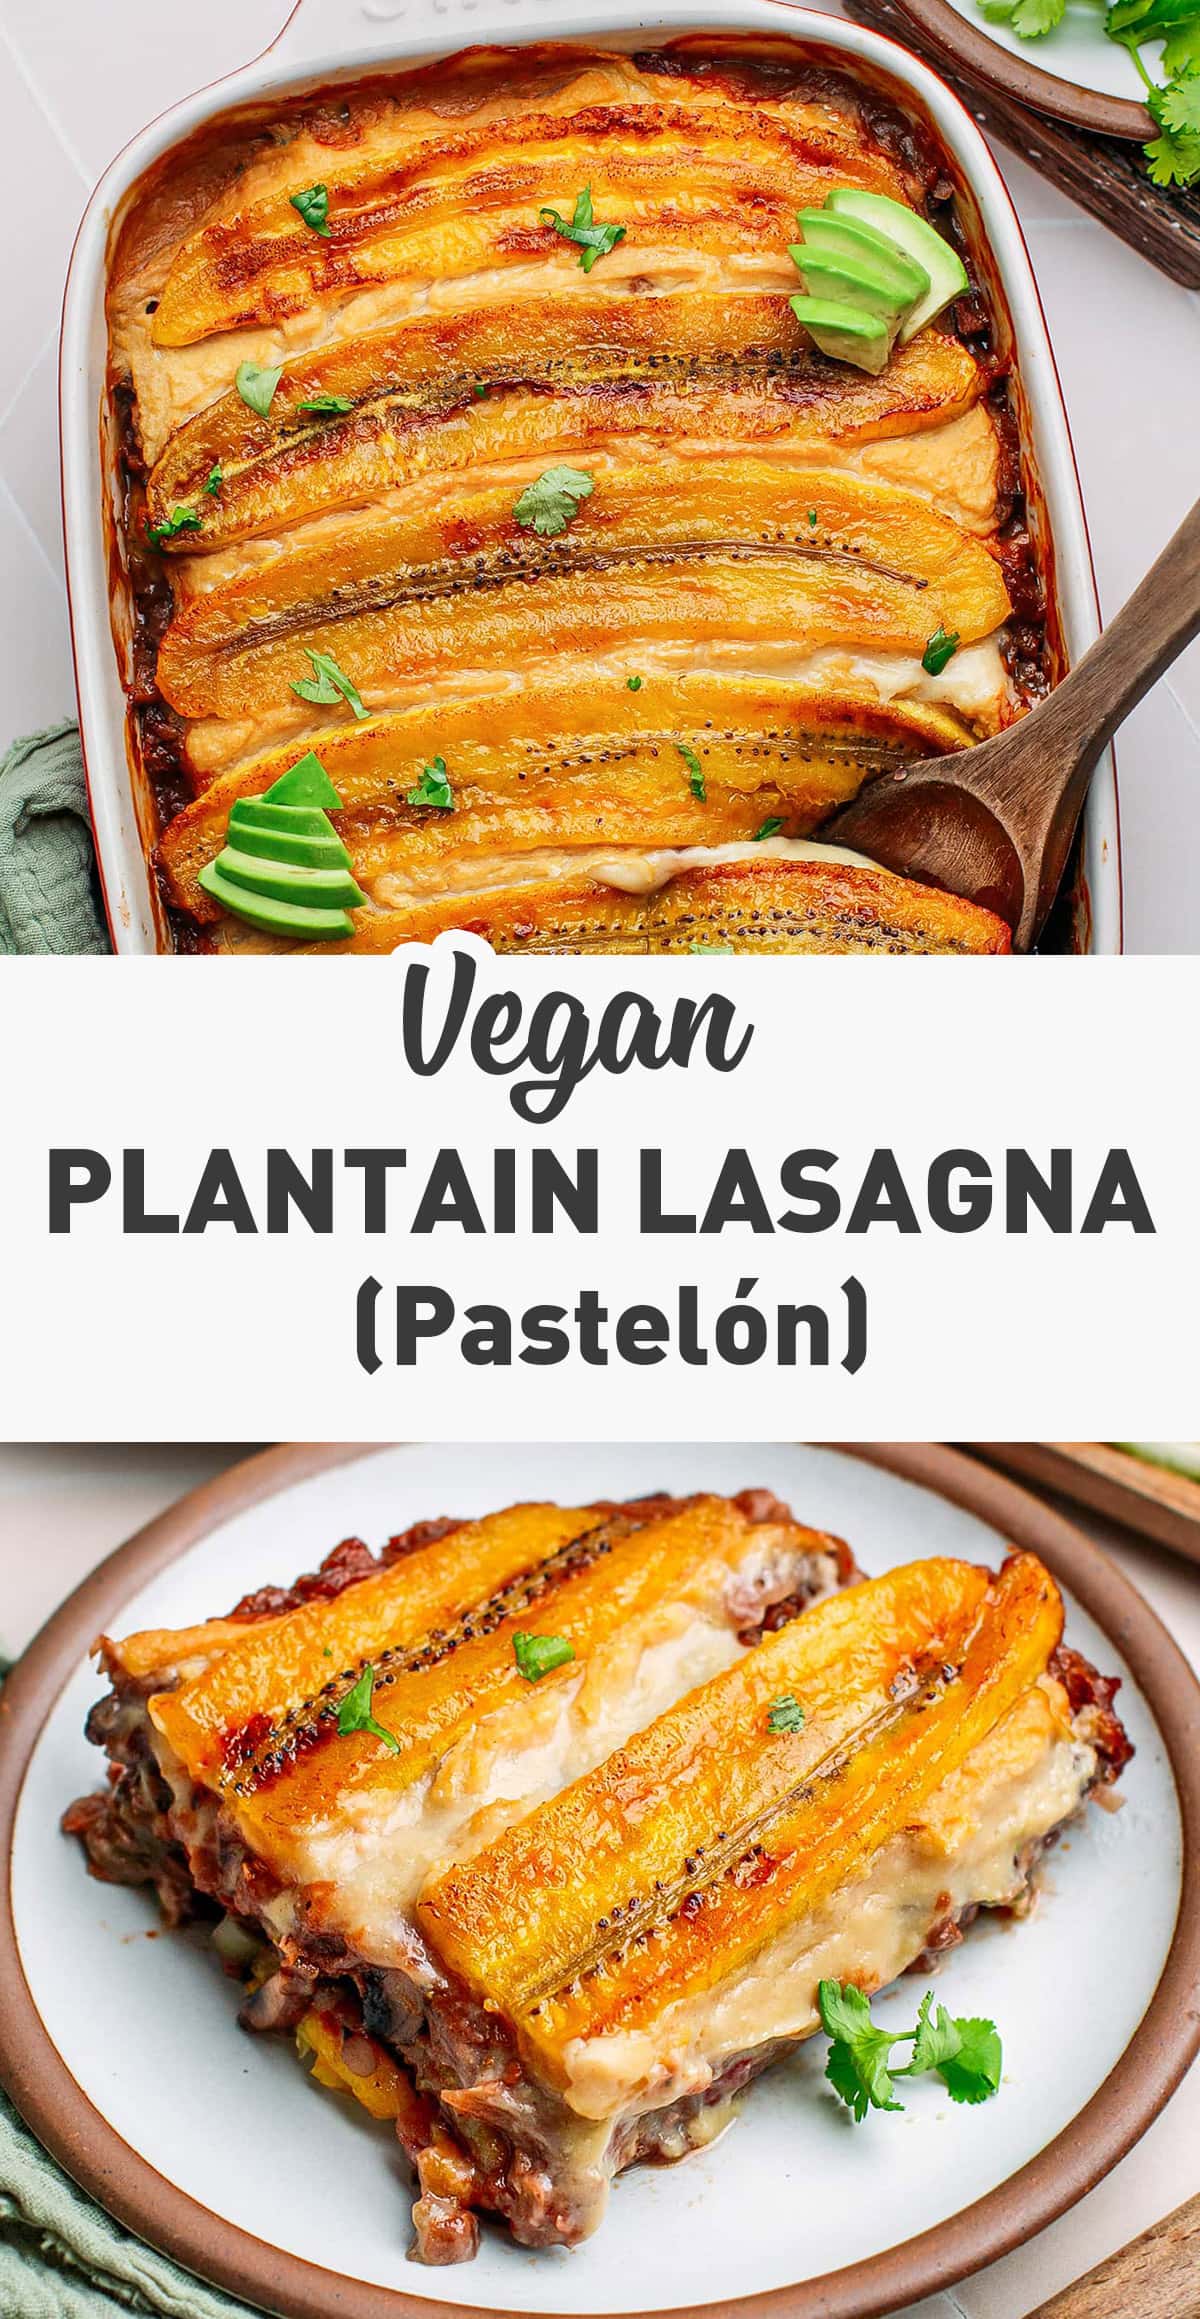 This vegan plantain lasagna, also known as Pastelón, is a Puerto Rican dish with bolognese sauce layered between sweet and tender banana slices! #pastelon #vegan #casseroles